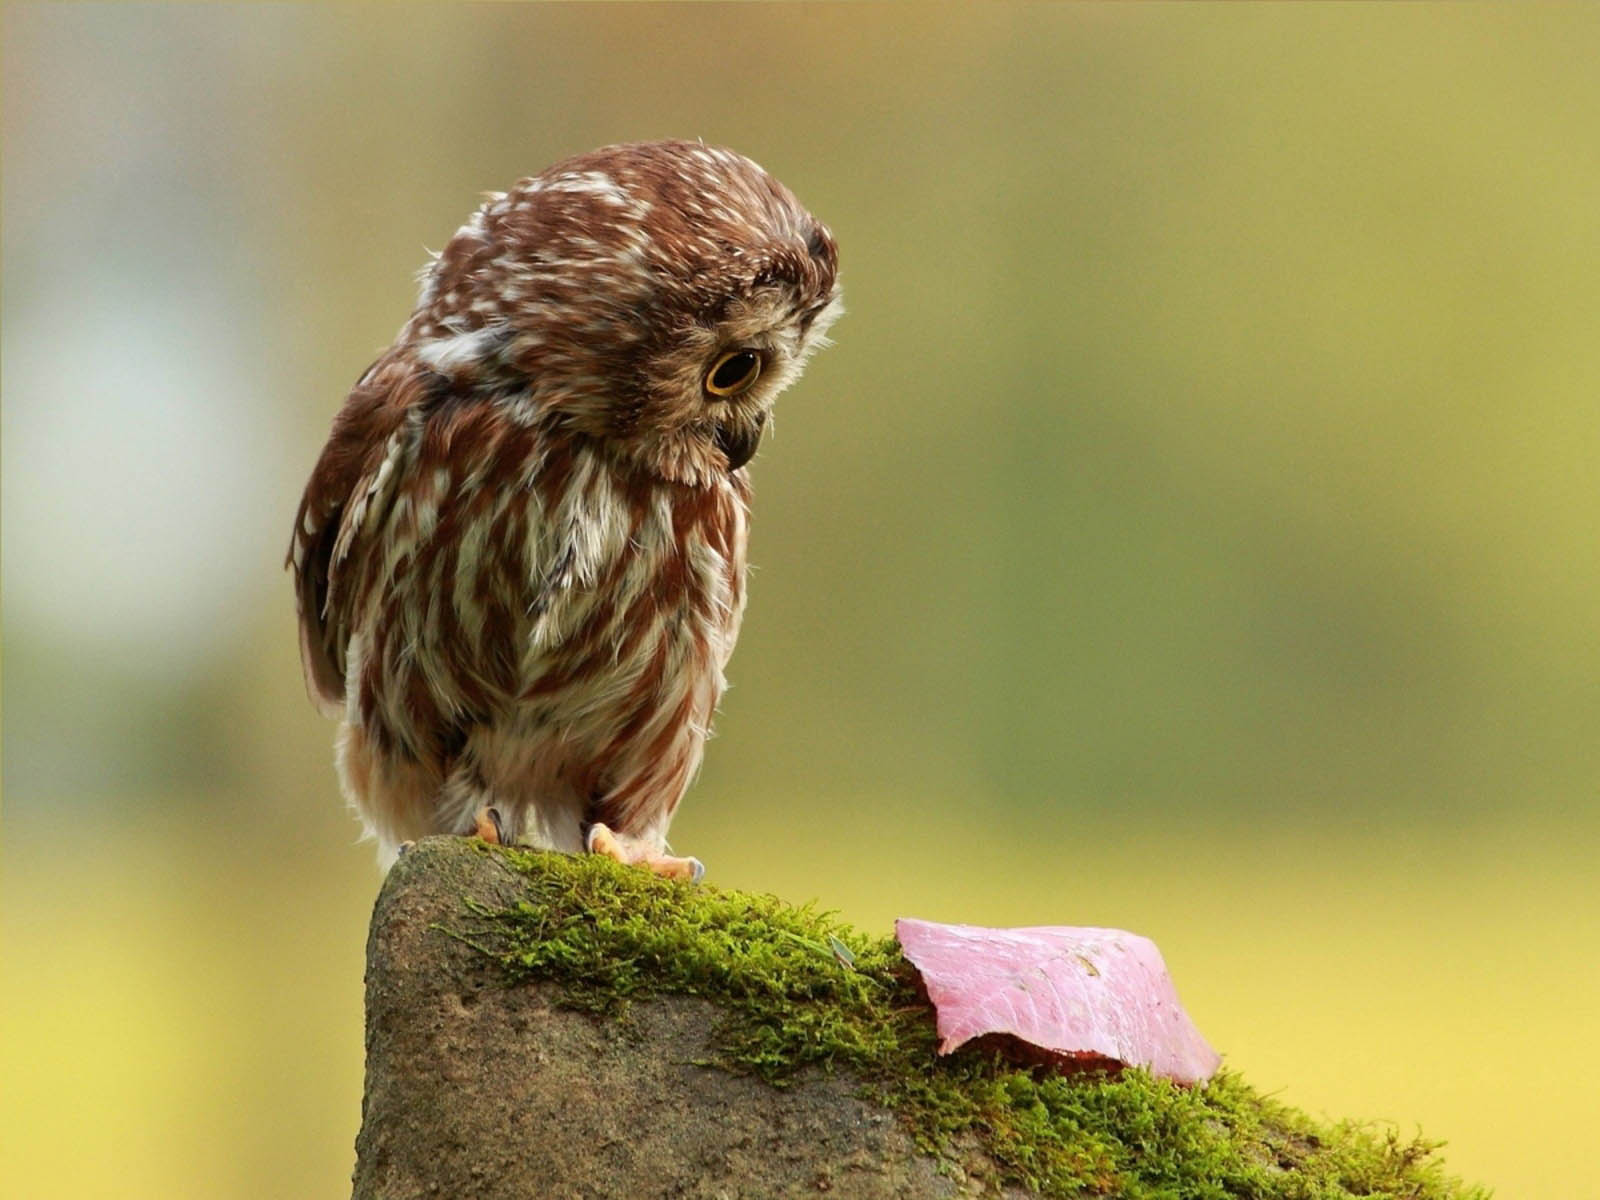 Owl Wallpaper Image Photos Pictures And Background For